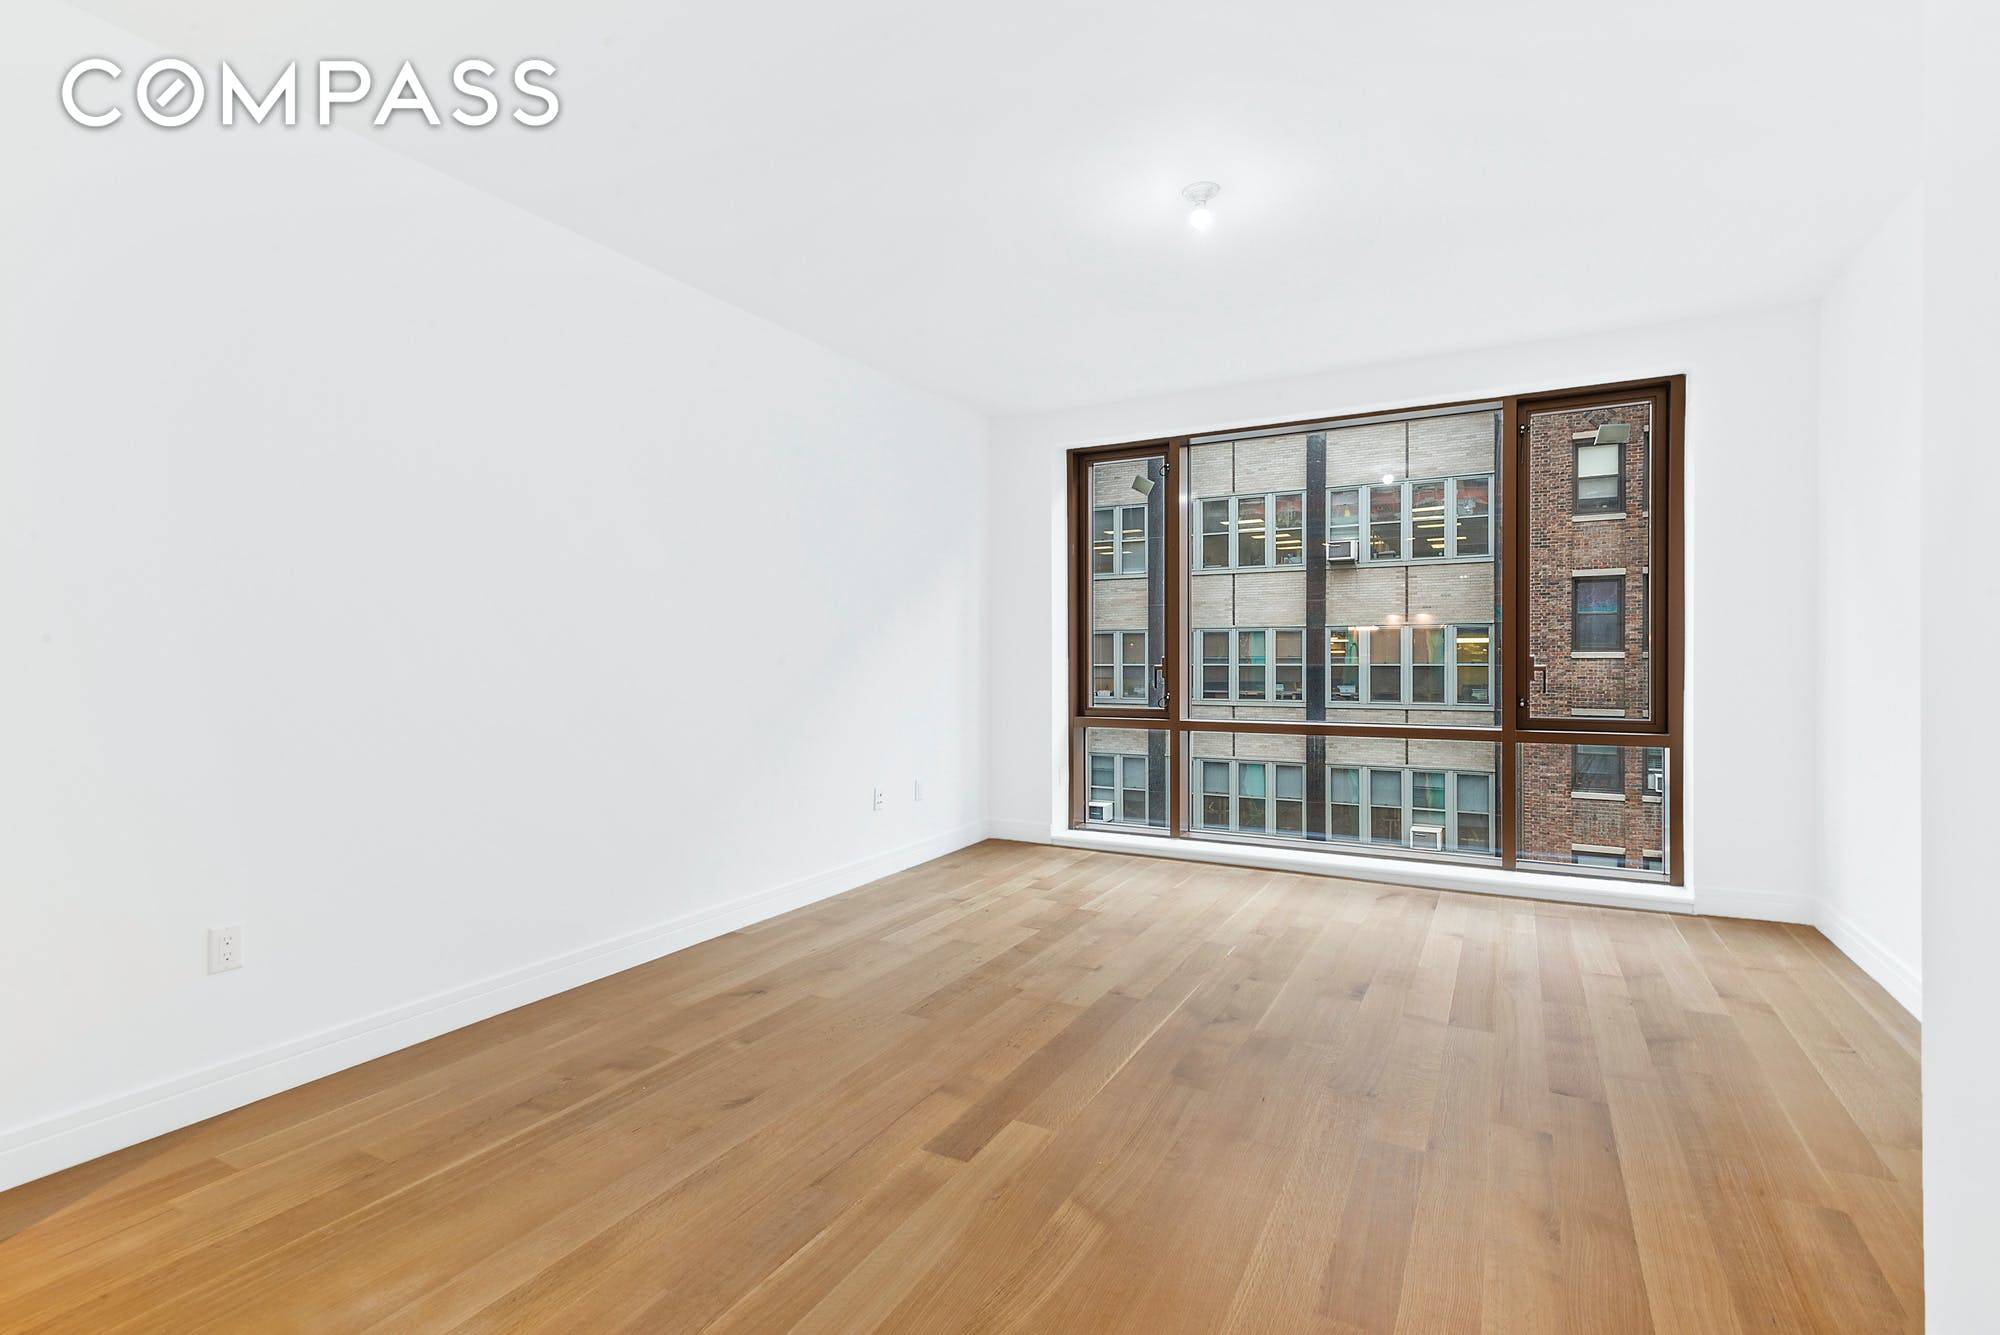 This brand new one bedroom at Gramercy Square has high ceilings, floor to ceiling windows and white oak flooring throughout with white lacquer cabinetry, a polished glass countertop and backsplash.